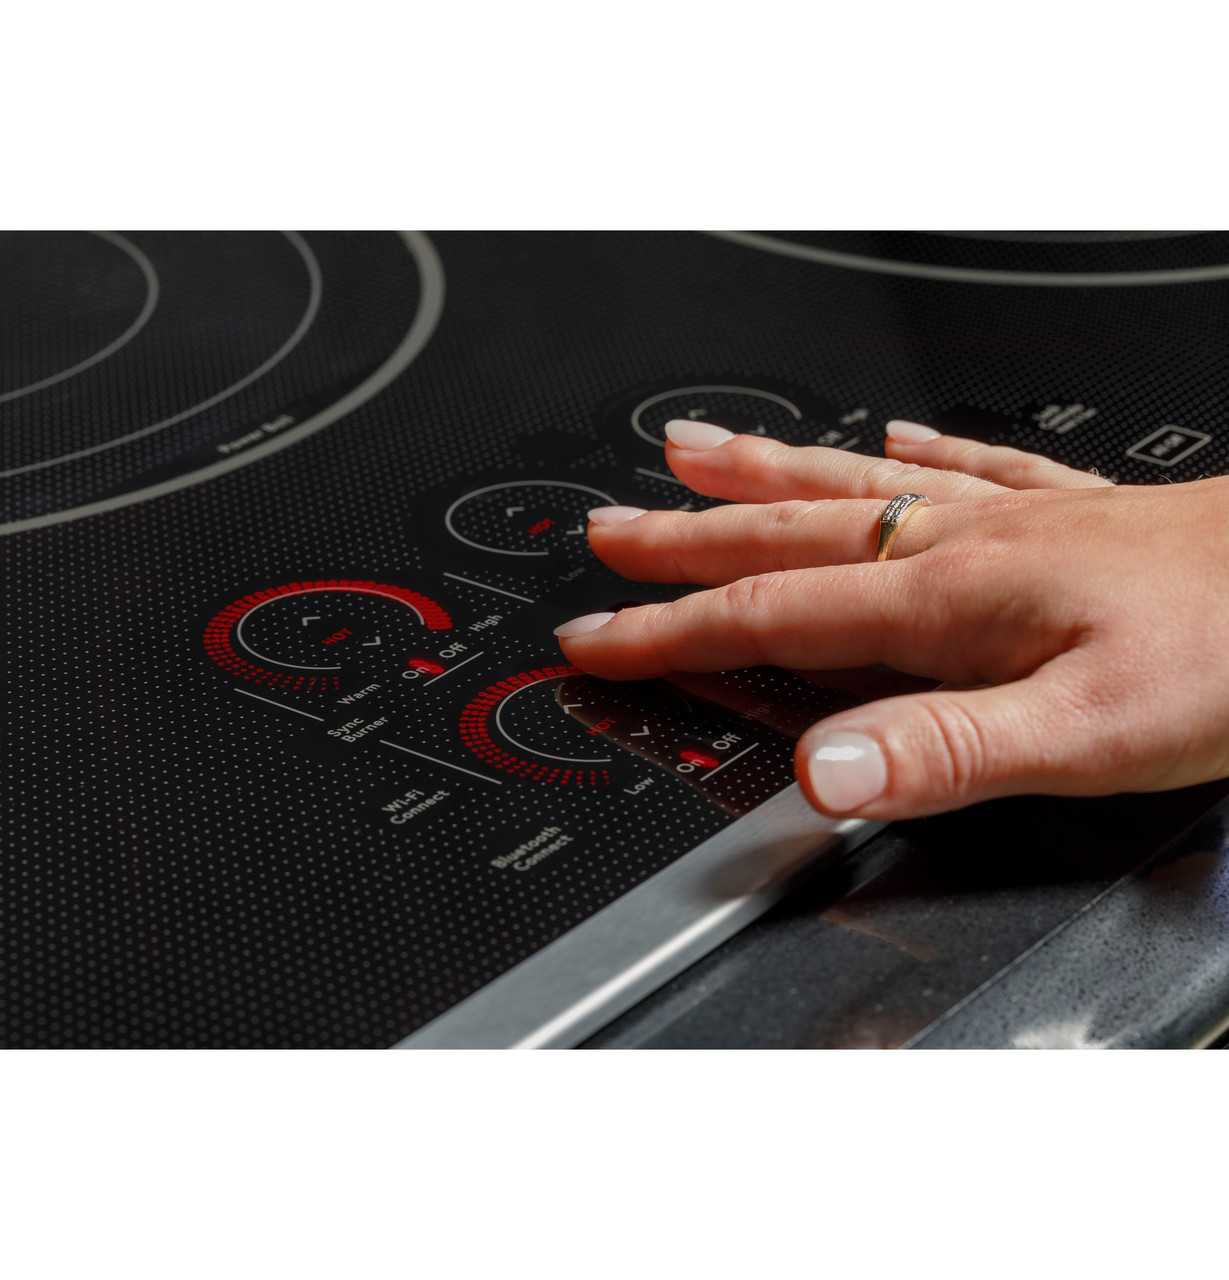 Café™ Series 36 Built-In Touch Control Induction Cooktop - CHP90362TSS -  Cafe Appliances